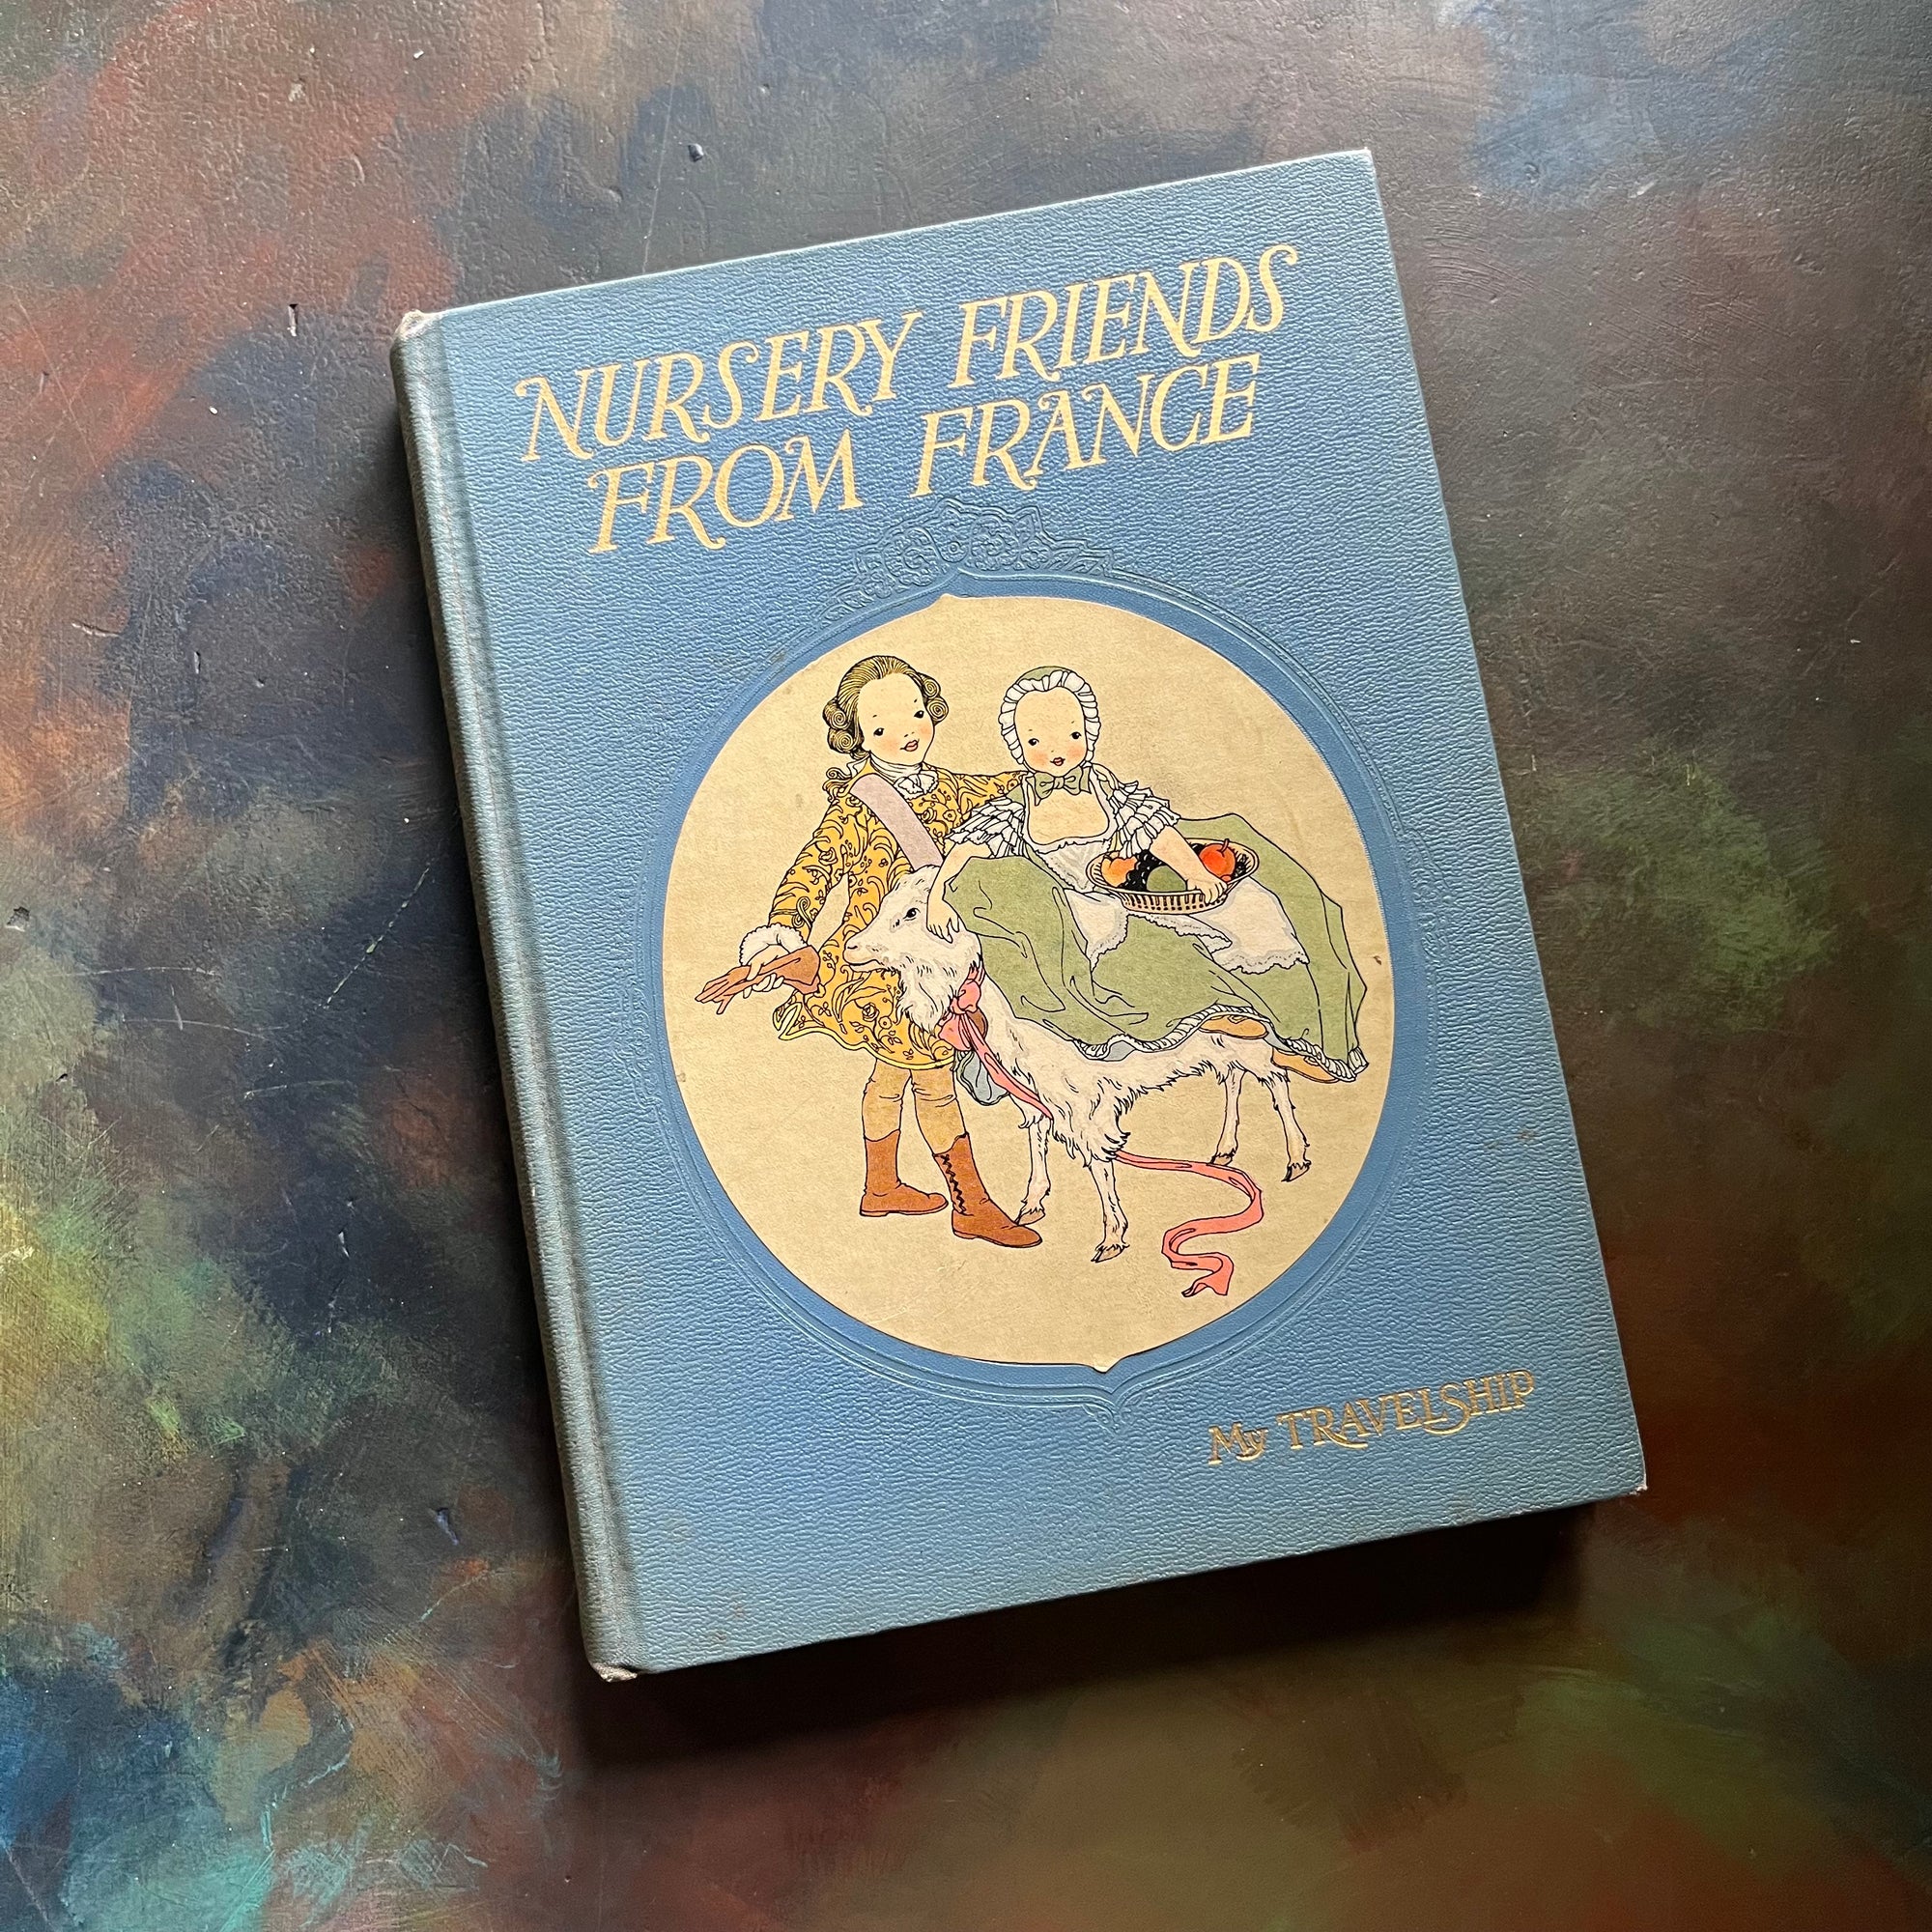 My Travelship Book-Nursery Friends from France by Olive Beaupre Miller-Illustrated by Maud & Miska Petersham-vintage children's nursery rhymes, poems & songs-view of the front cover